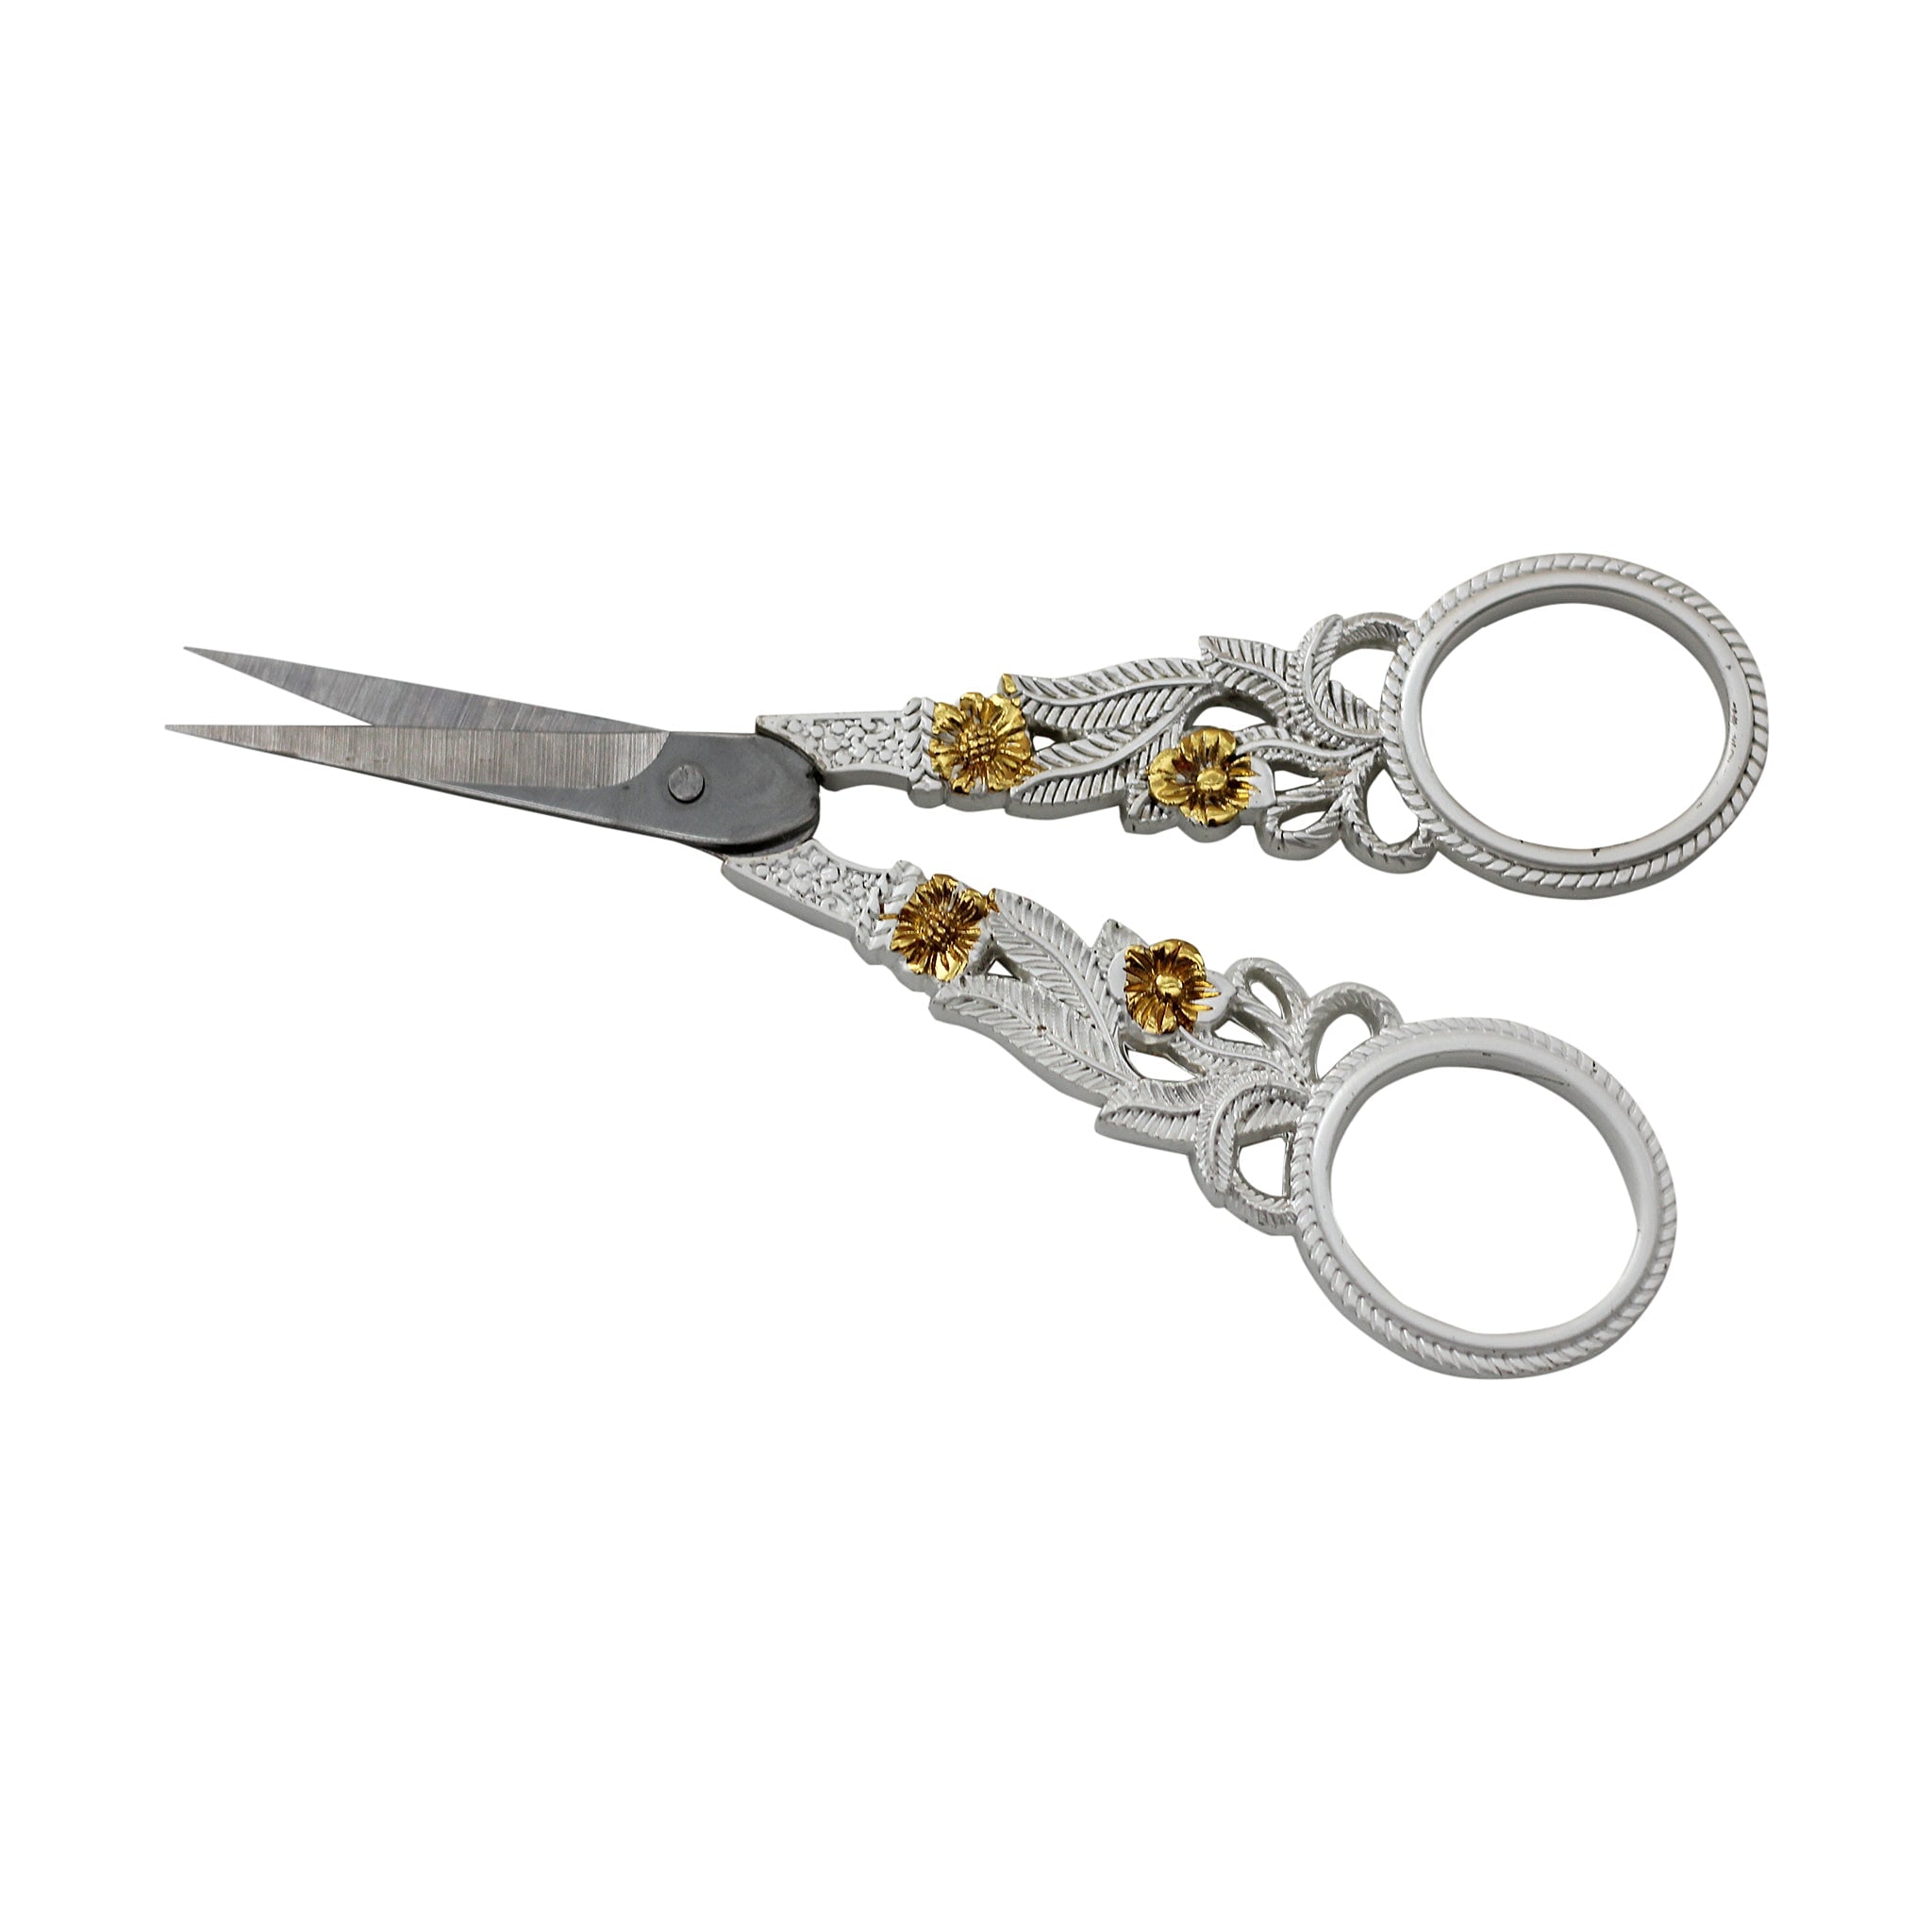 Embroidery Kits Include 2 Pairs Vintage Scissors, Ghana